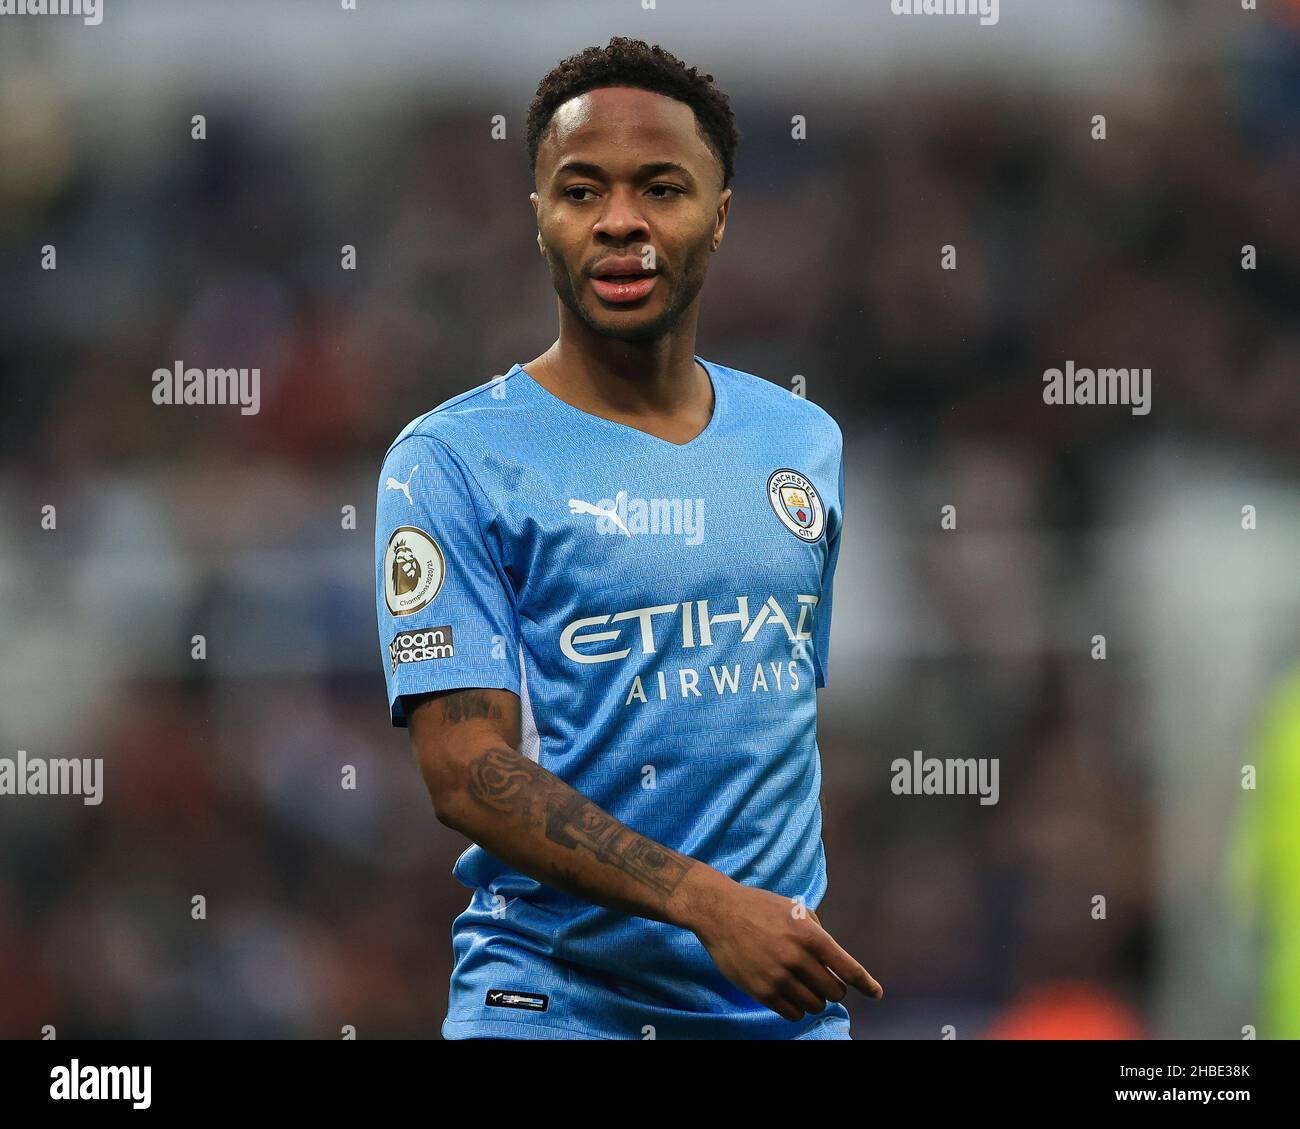 Raheem Sterling #7 of Manchester City during the game in, on 12/19/2021. (Photo by Mark Cosgrove/News Images/Sipa USA) Credit: Sipa USA/Alamy Live News Stock Photo